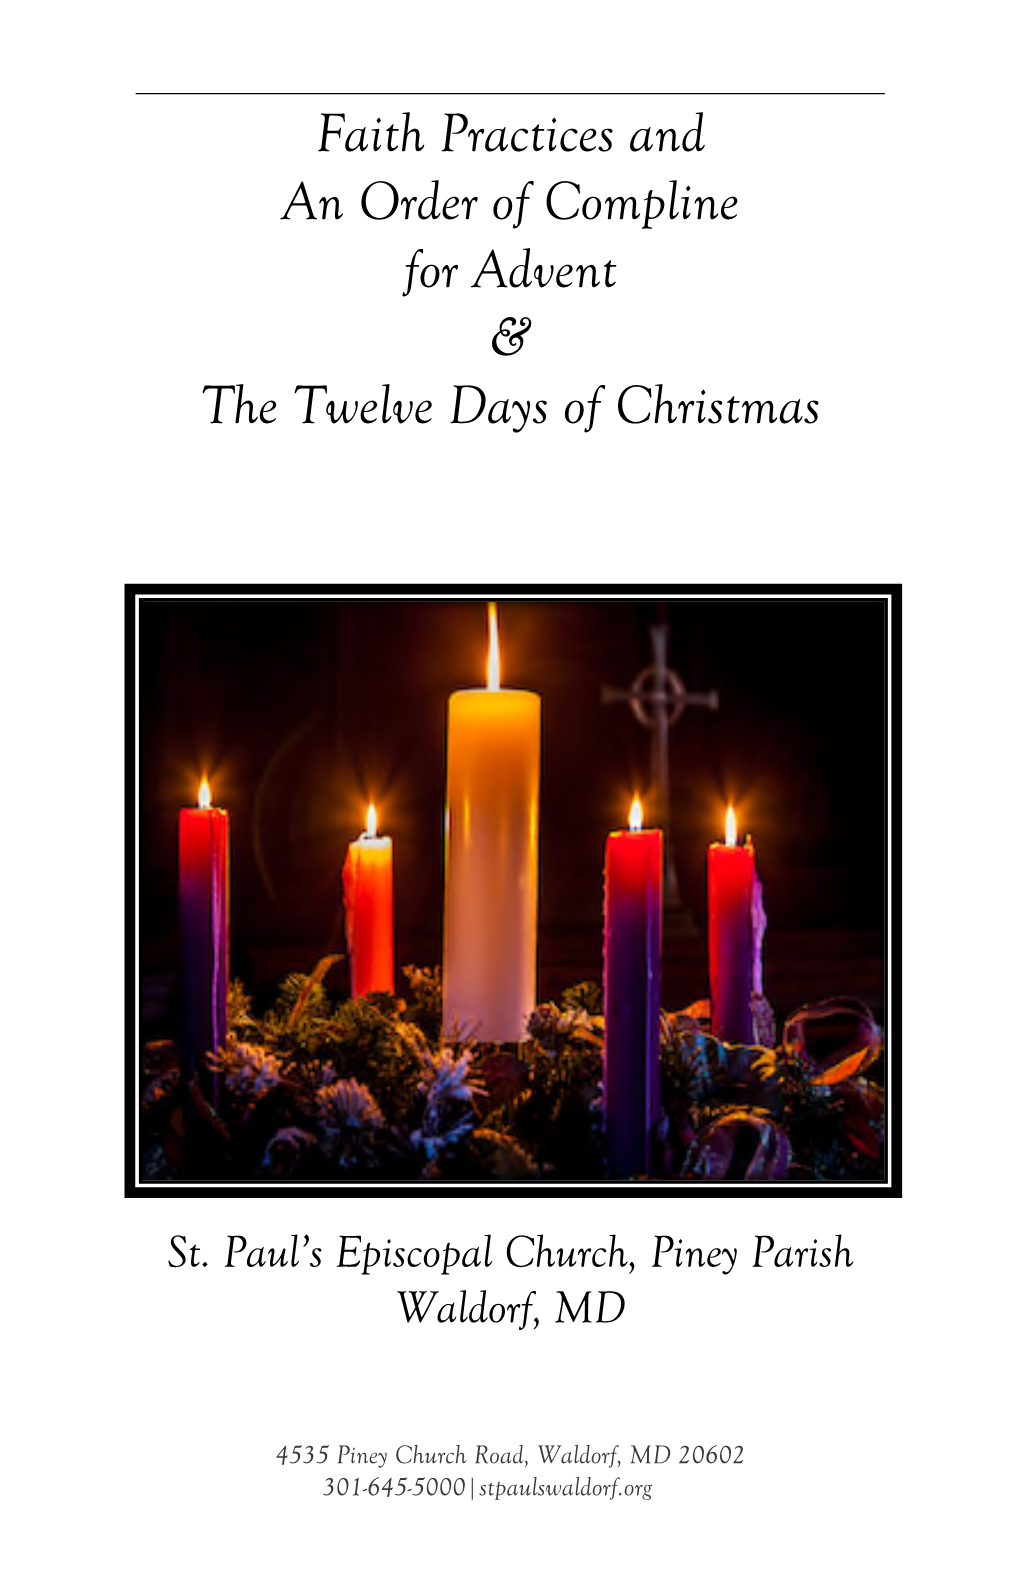 Faith Practices and an Order of Compline for Advent & the Twelve